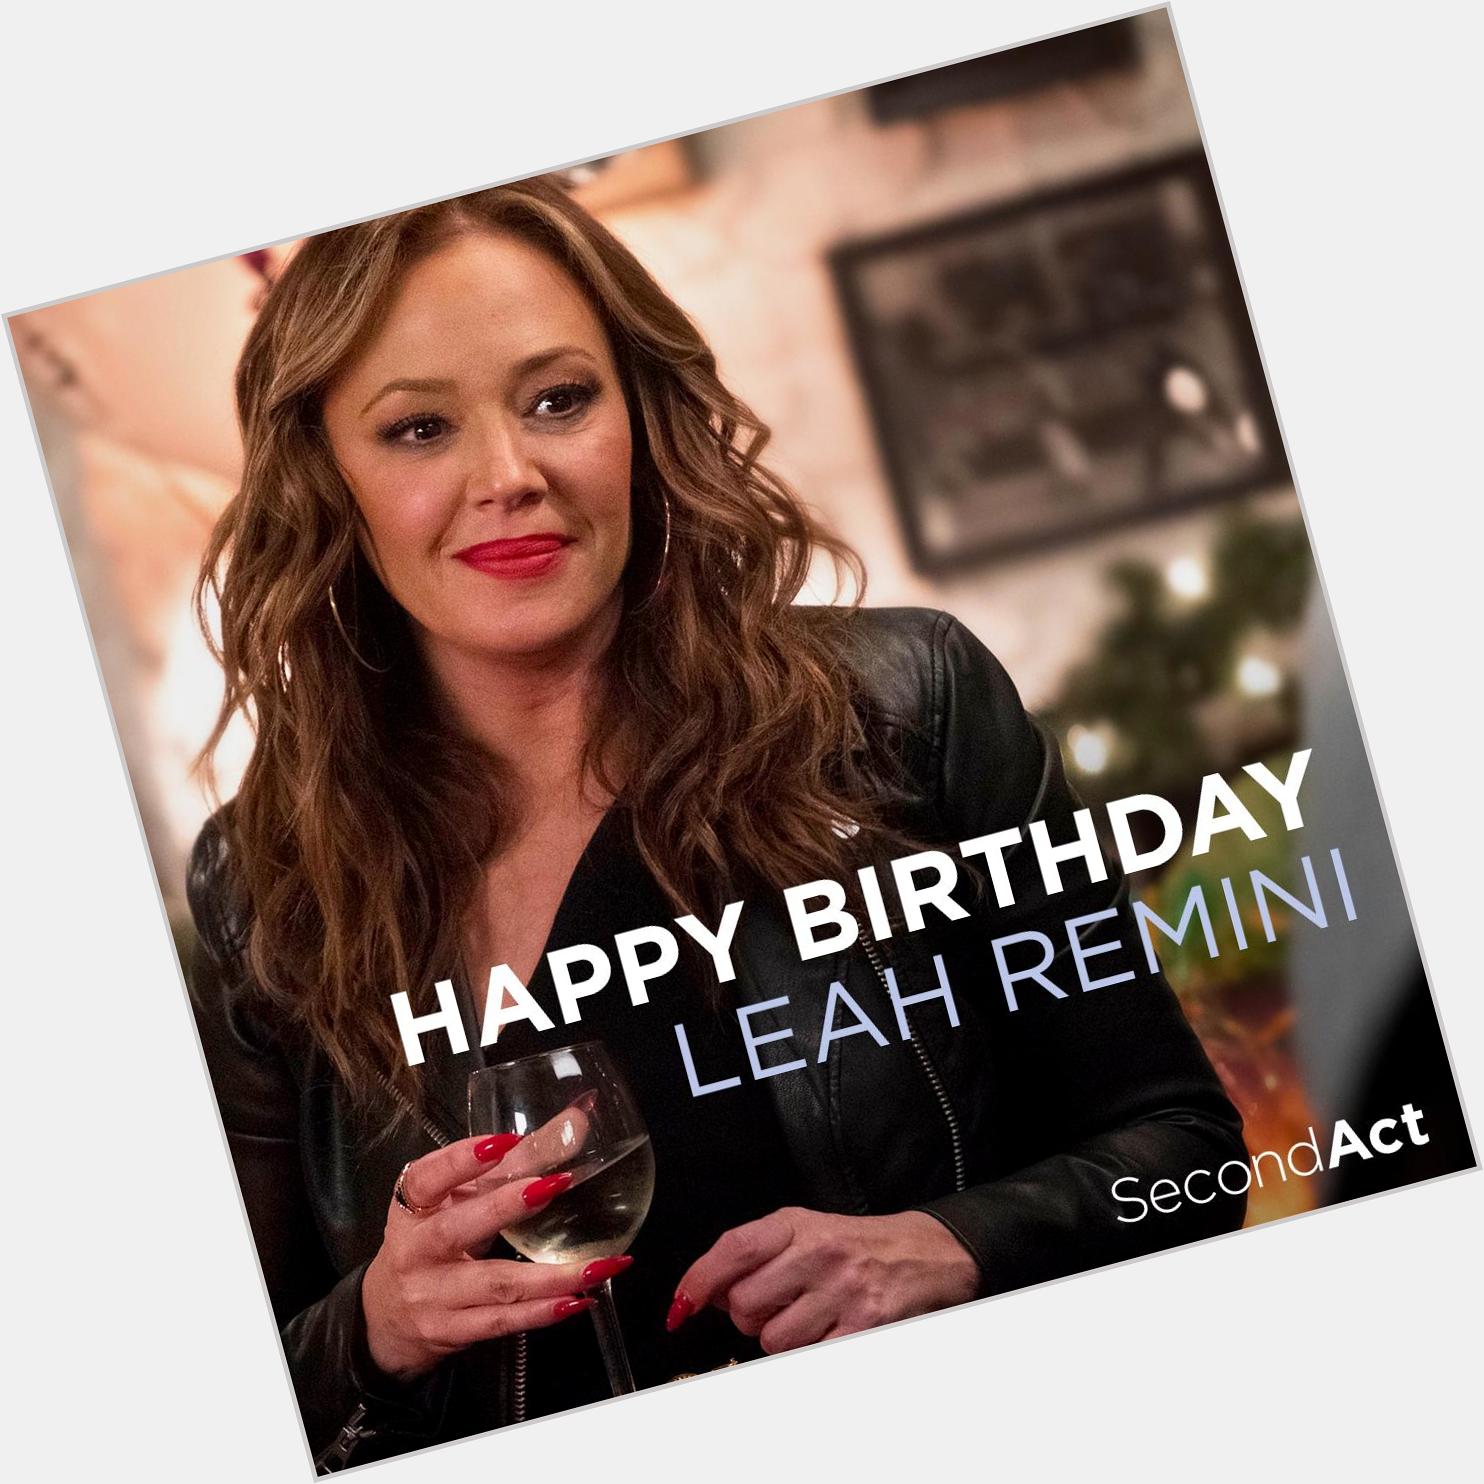 Happy birthday to the lovely Leah Remini! 